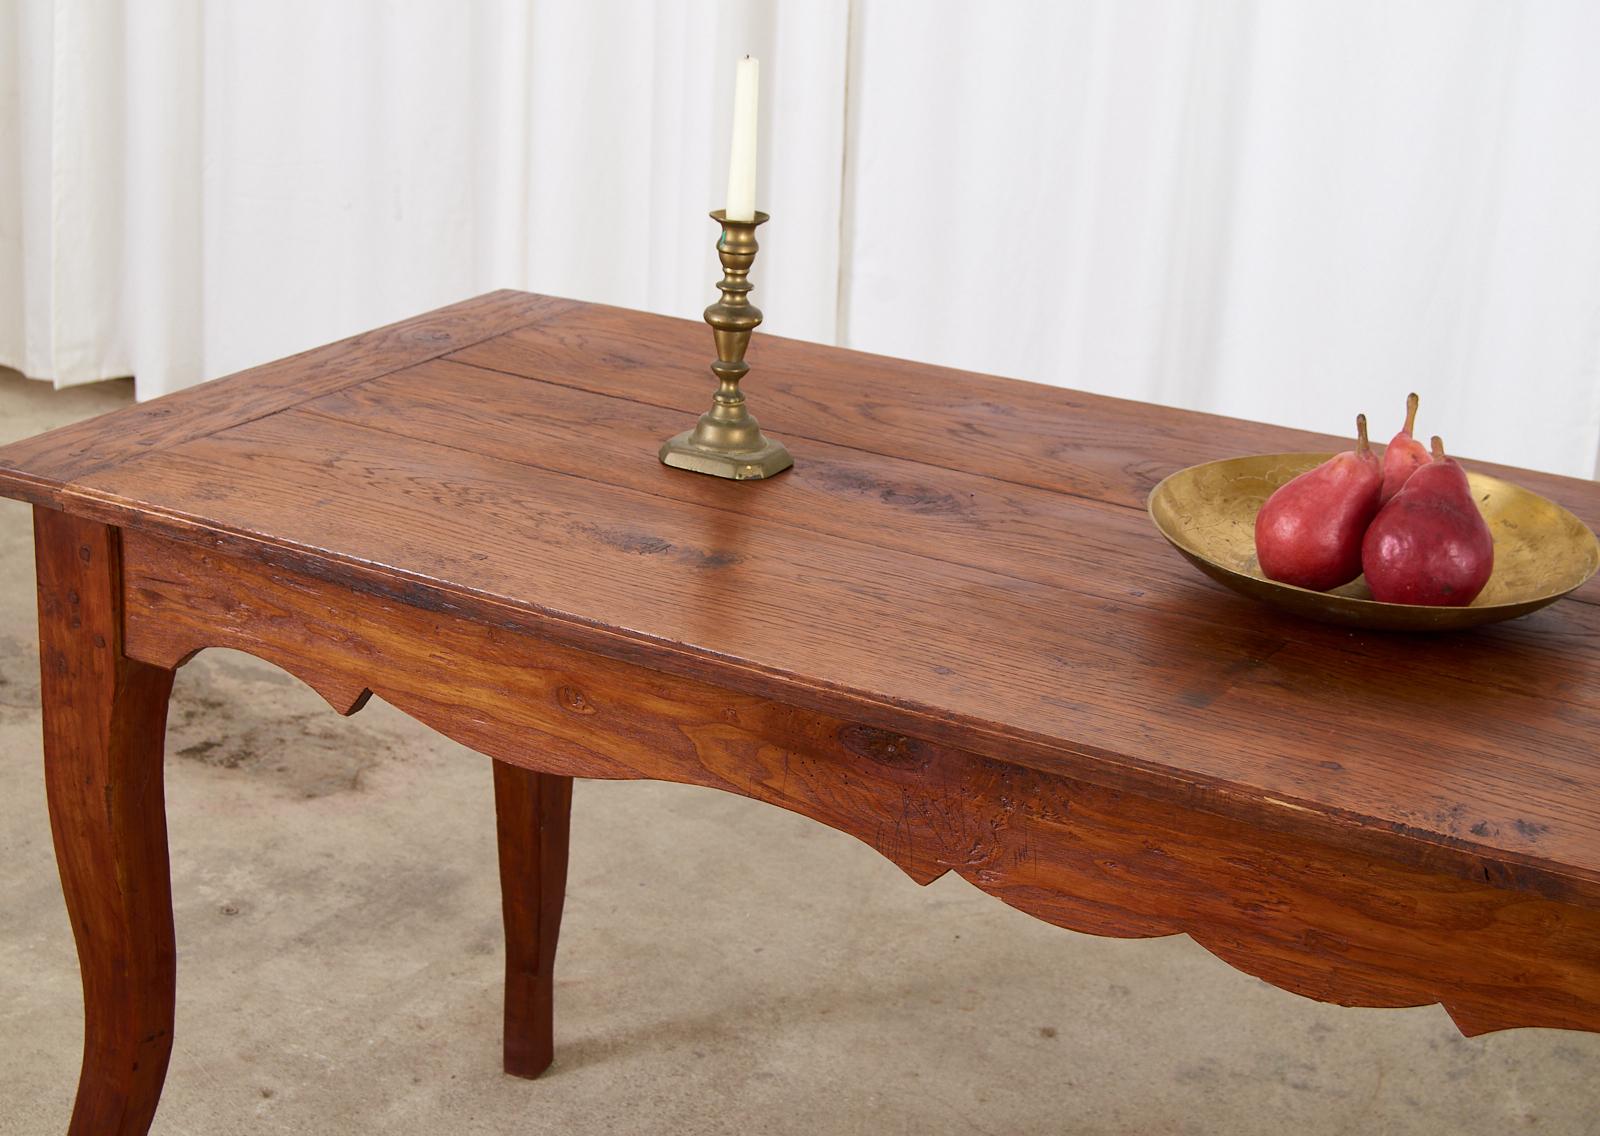 Rustic country French provincial farmhouse dining table or console table. The table is crafted from oak with a plank top having breadboard ends. The base has a storage drawer on one end and decorative scalloped aprons on the sides. Ample legroom